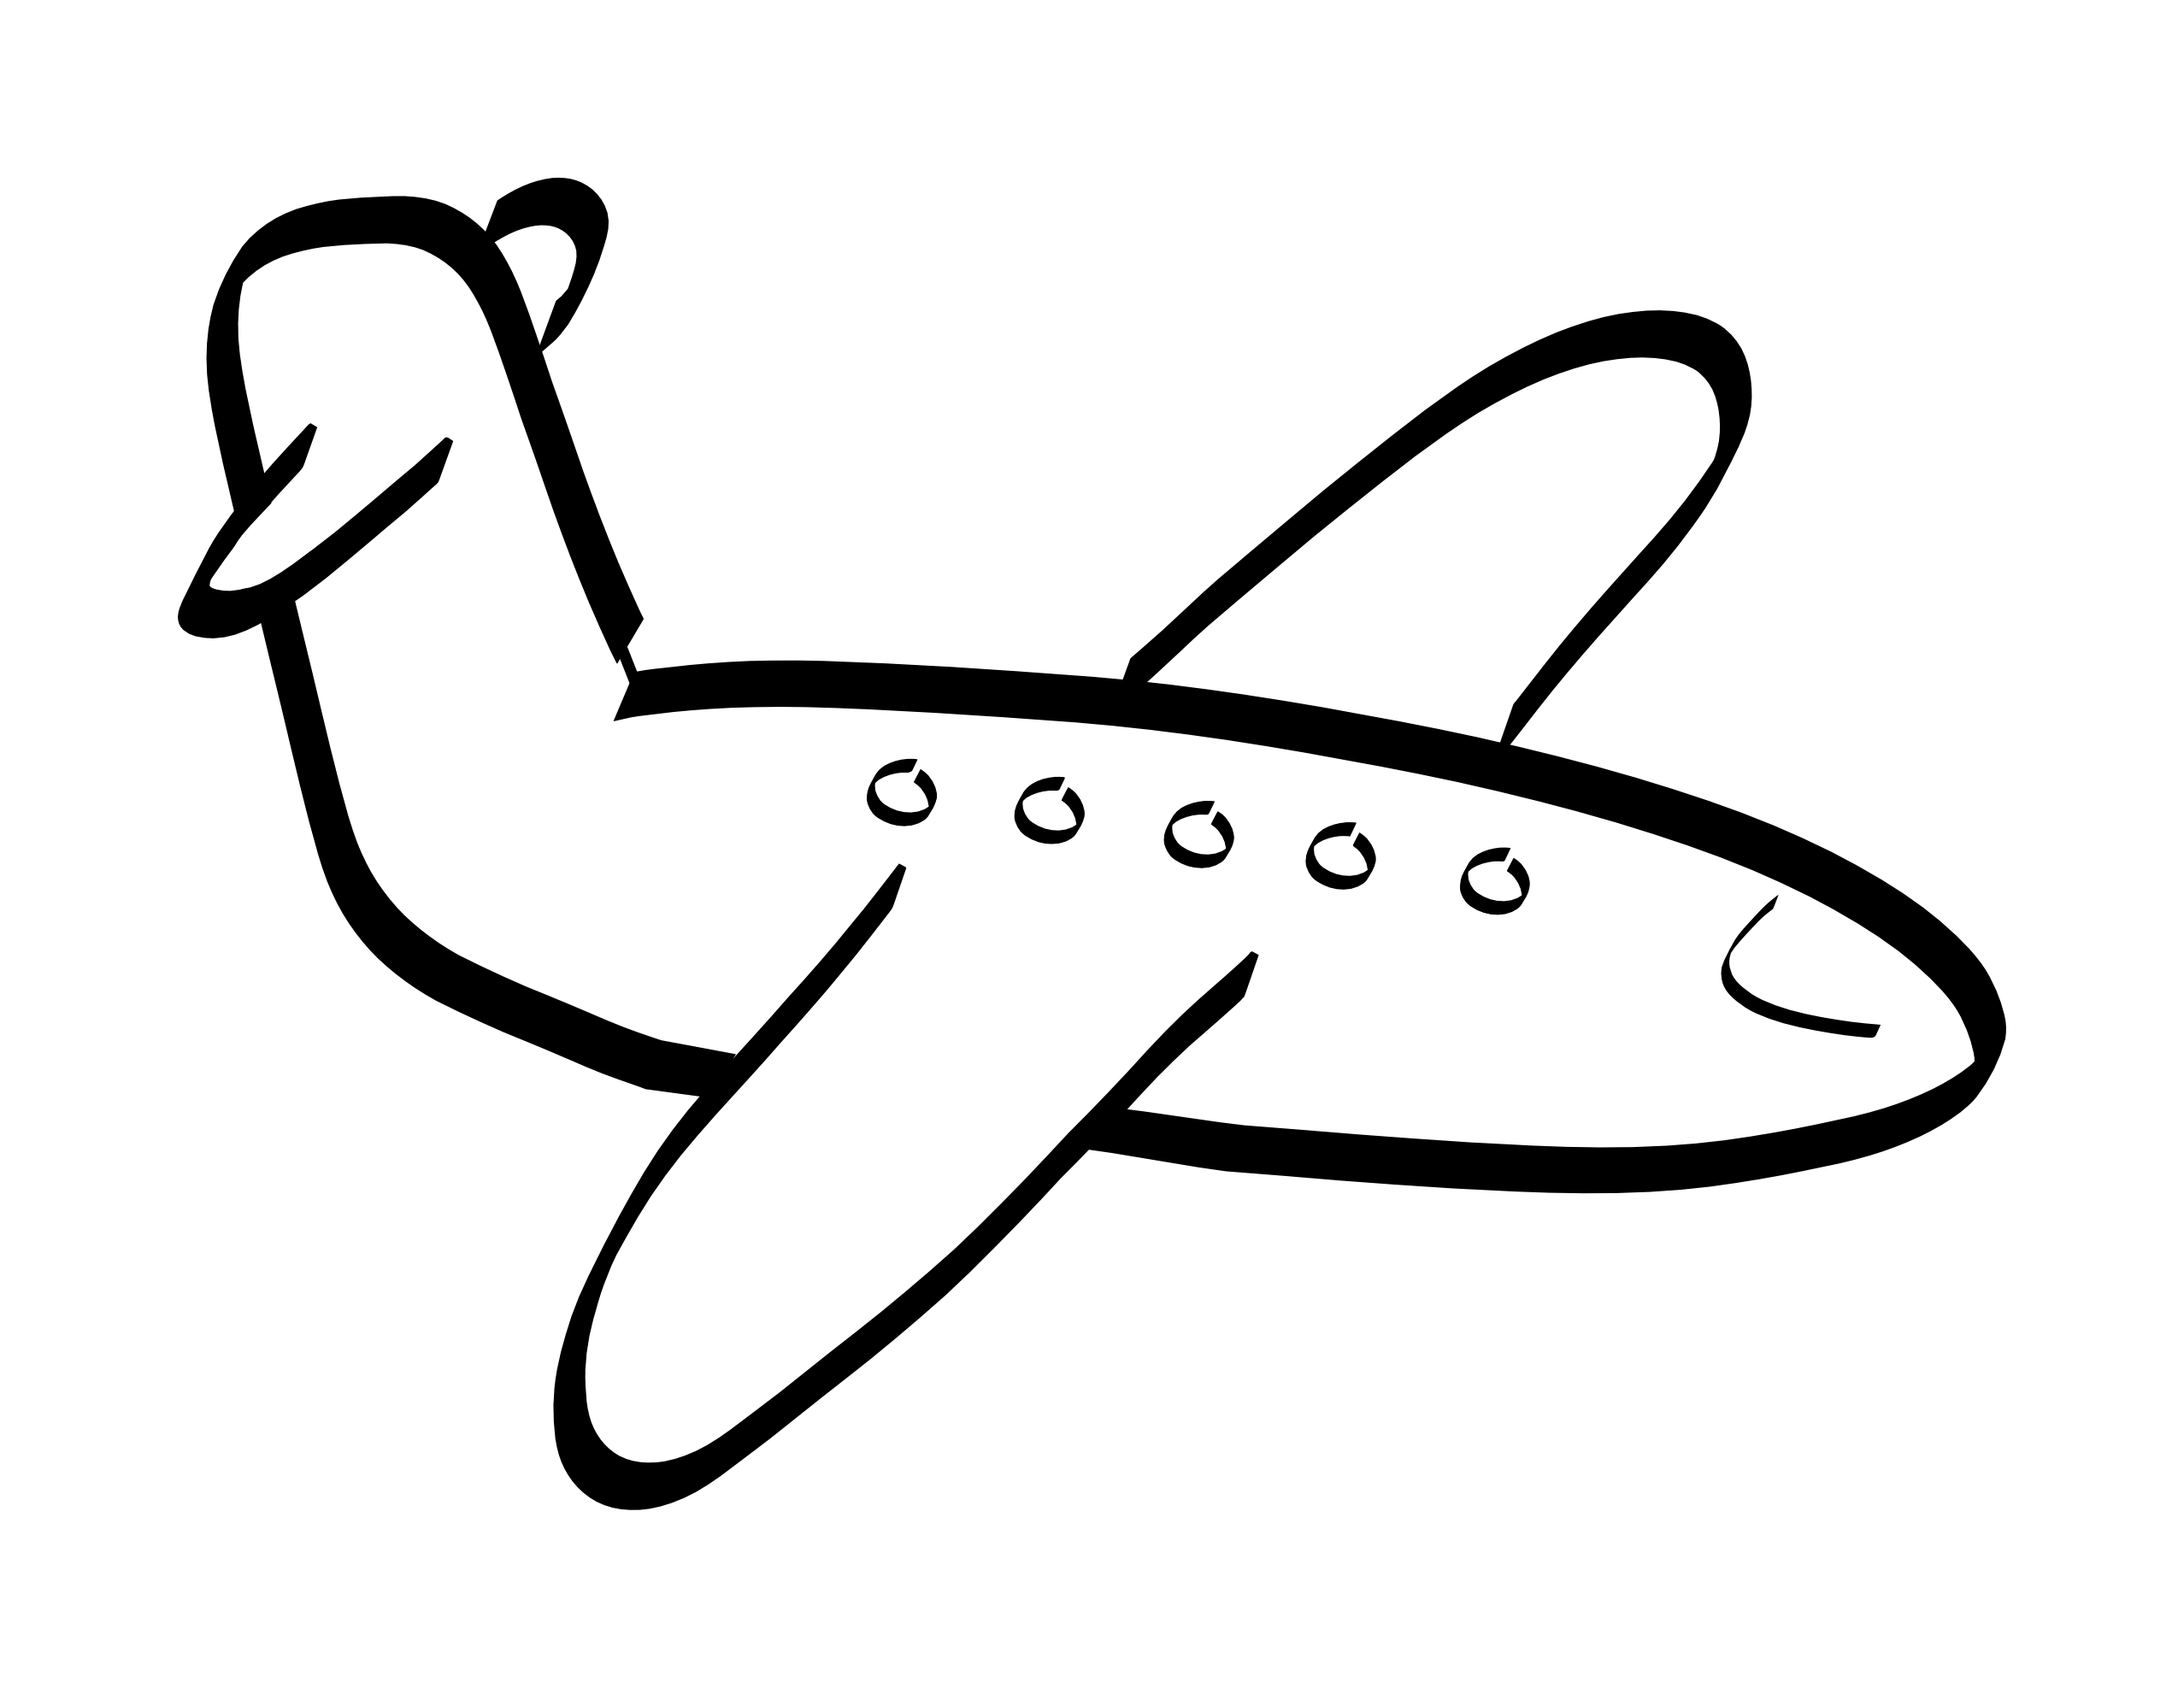 Airplane clipart black and wh - Airplane Clipart Black And White